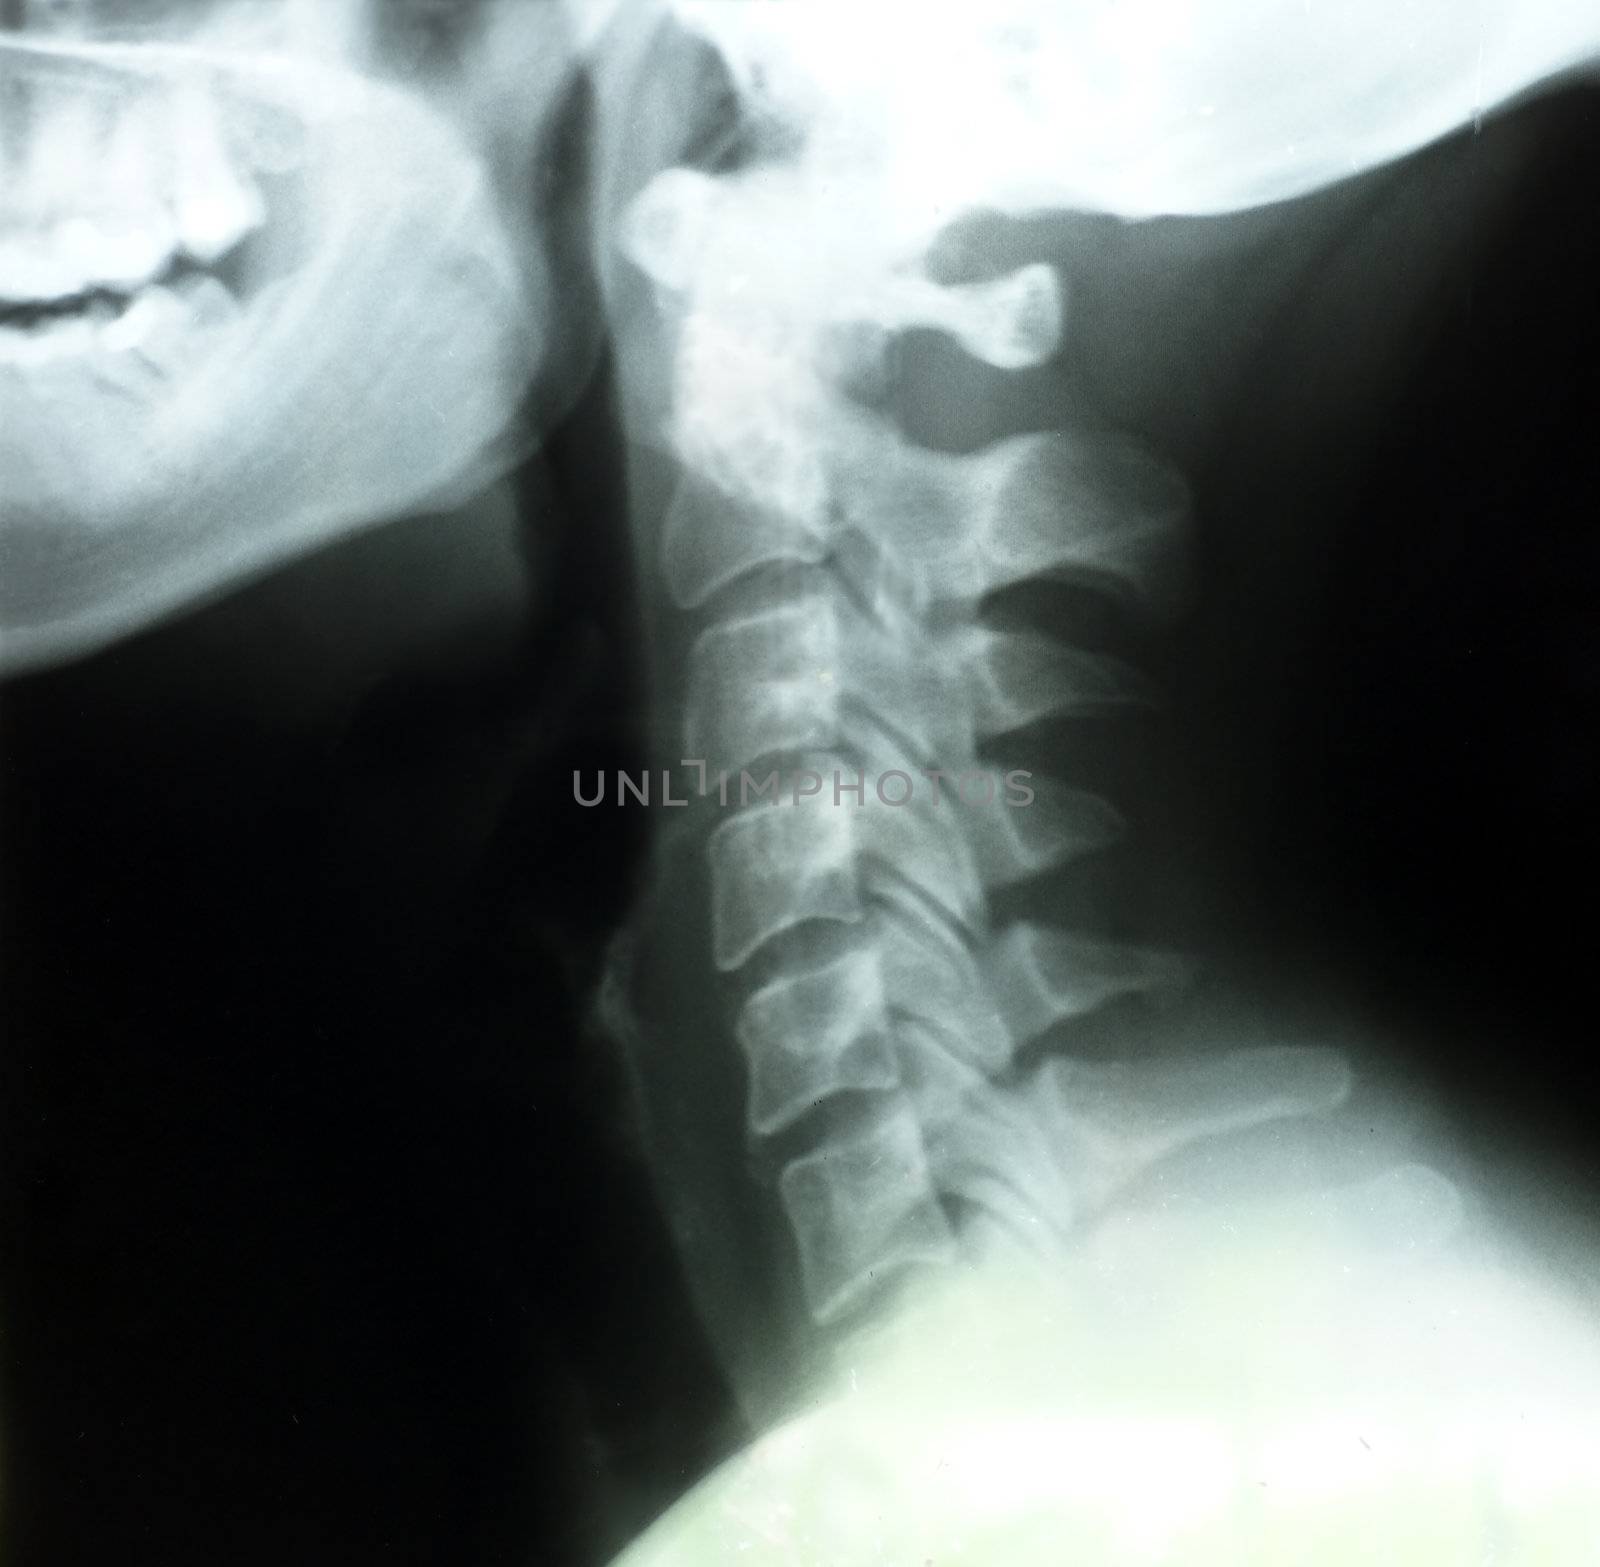 X-rays of the neck of a woman patient, showing bones or cervical vertebrae from the side.